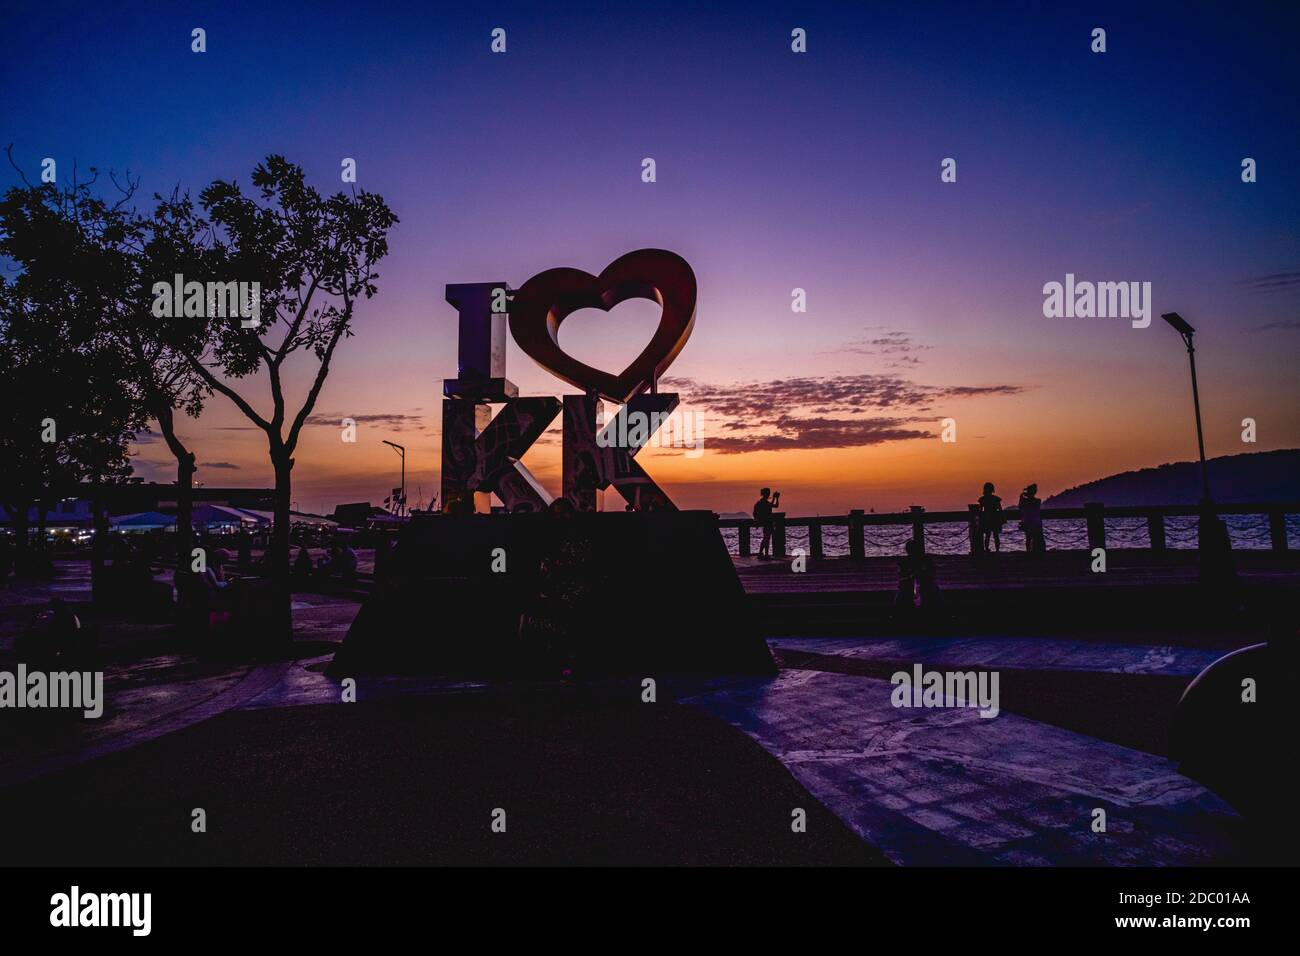 Seafront of Kota Kinabalu with the I Love KK signage and people admiring the sunset view of the sea. Stock Photo